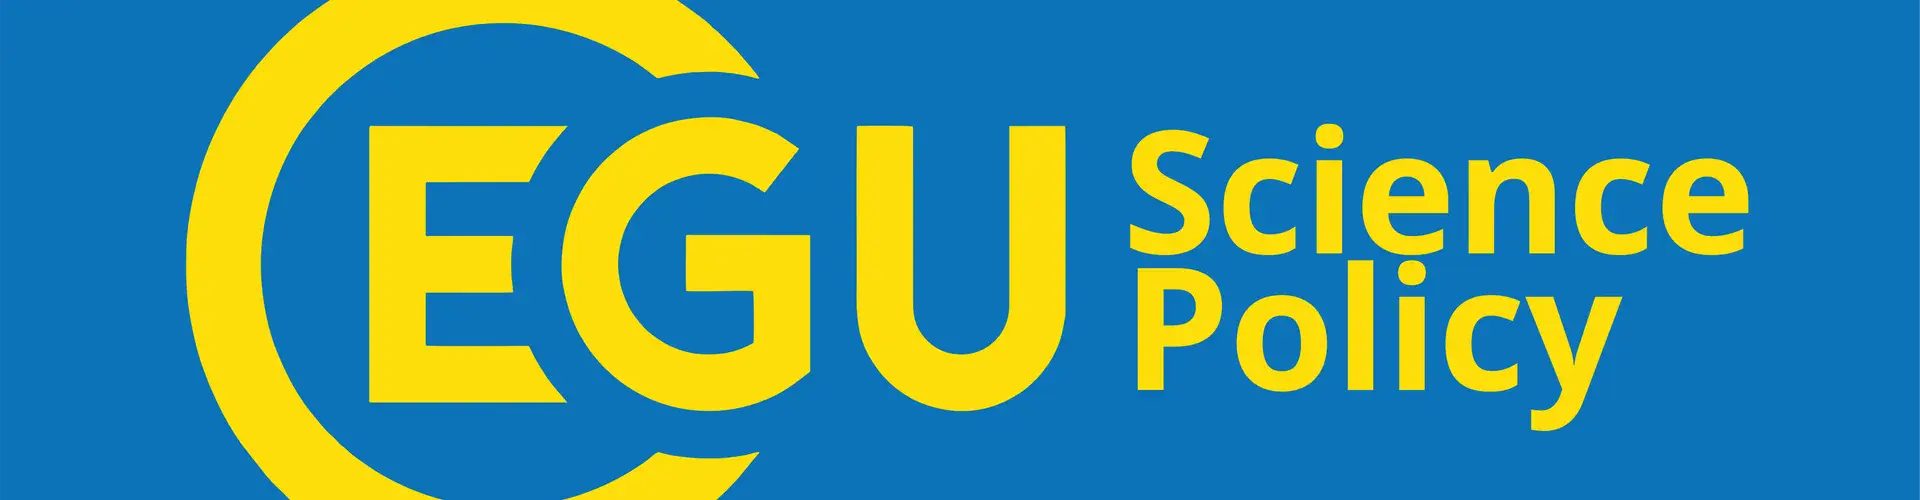 science policy logo (blue yellow).png (Credit: EGU Science Policy logo)